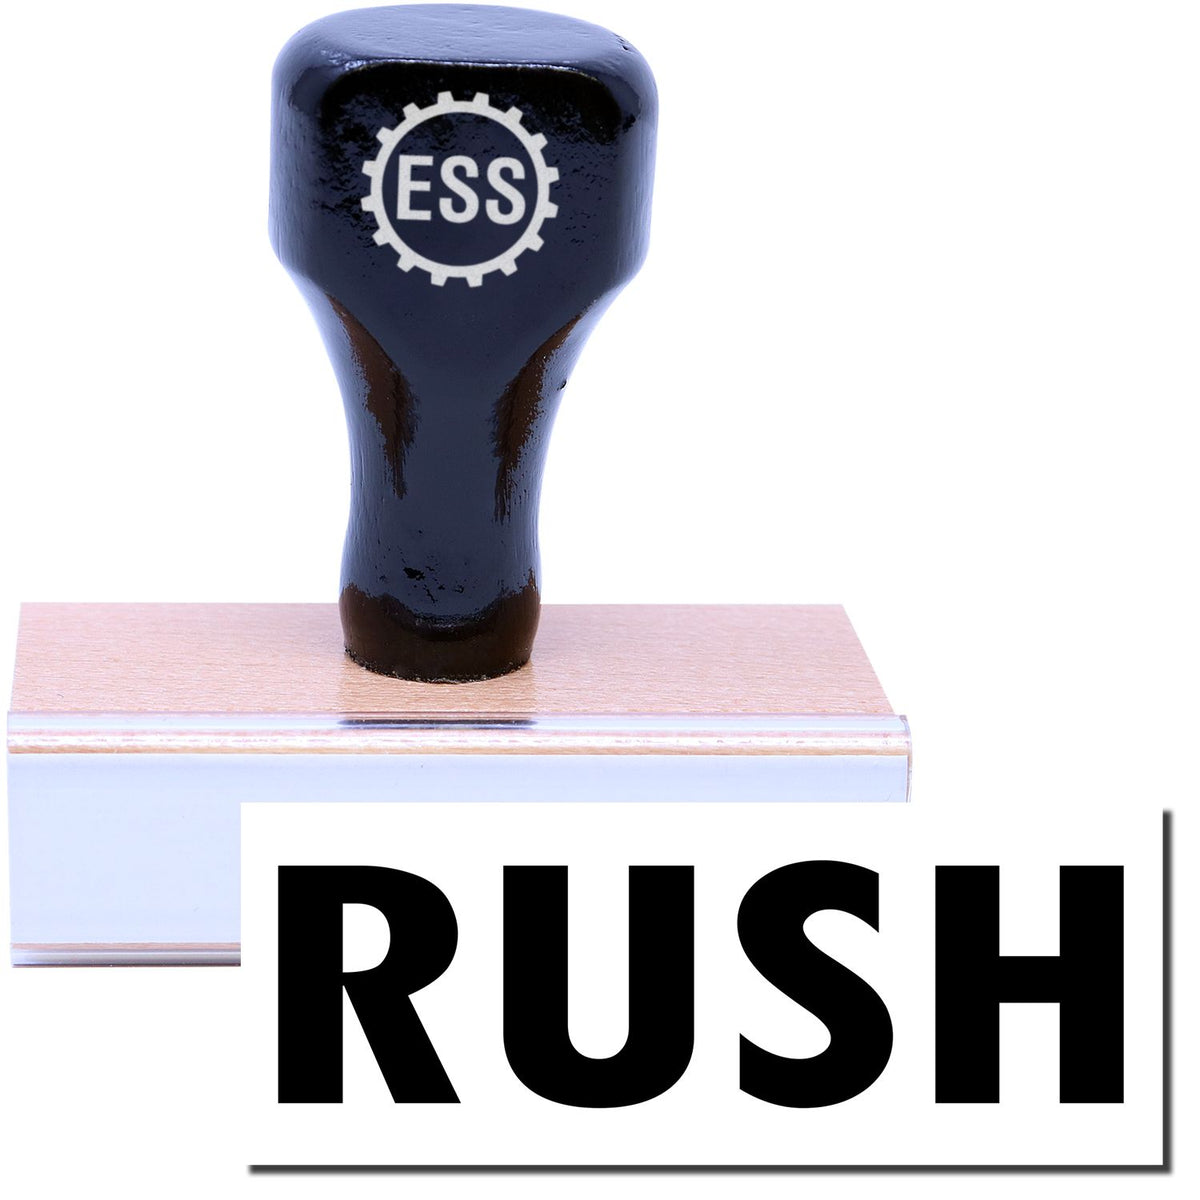 A stock office rubber stamp with a stamped image showing how the text &quot;RUSH&quot; is displayed after stamping.